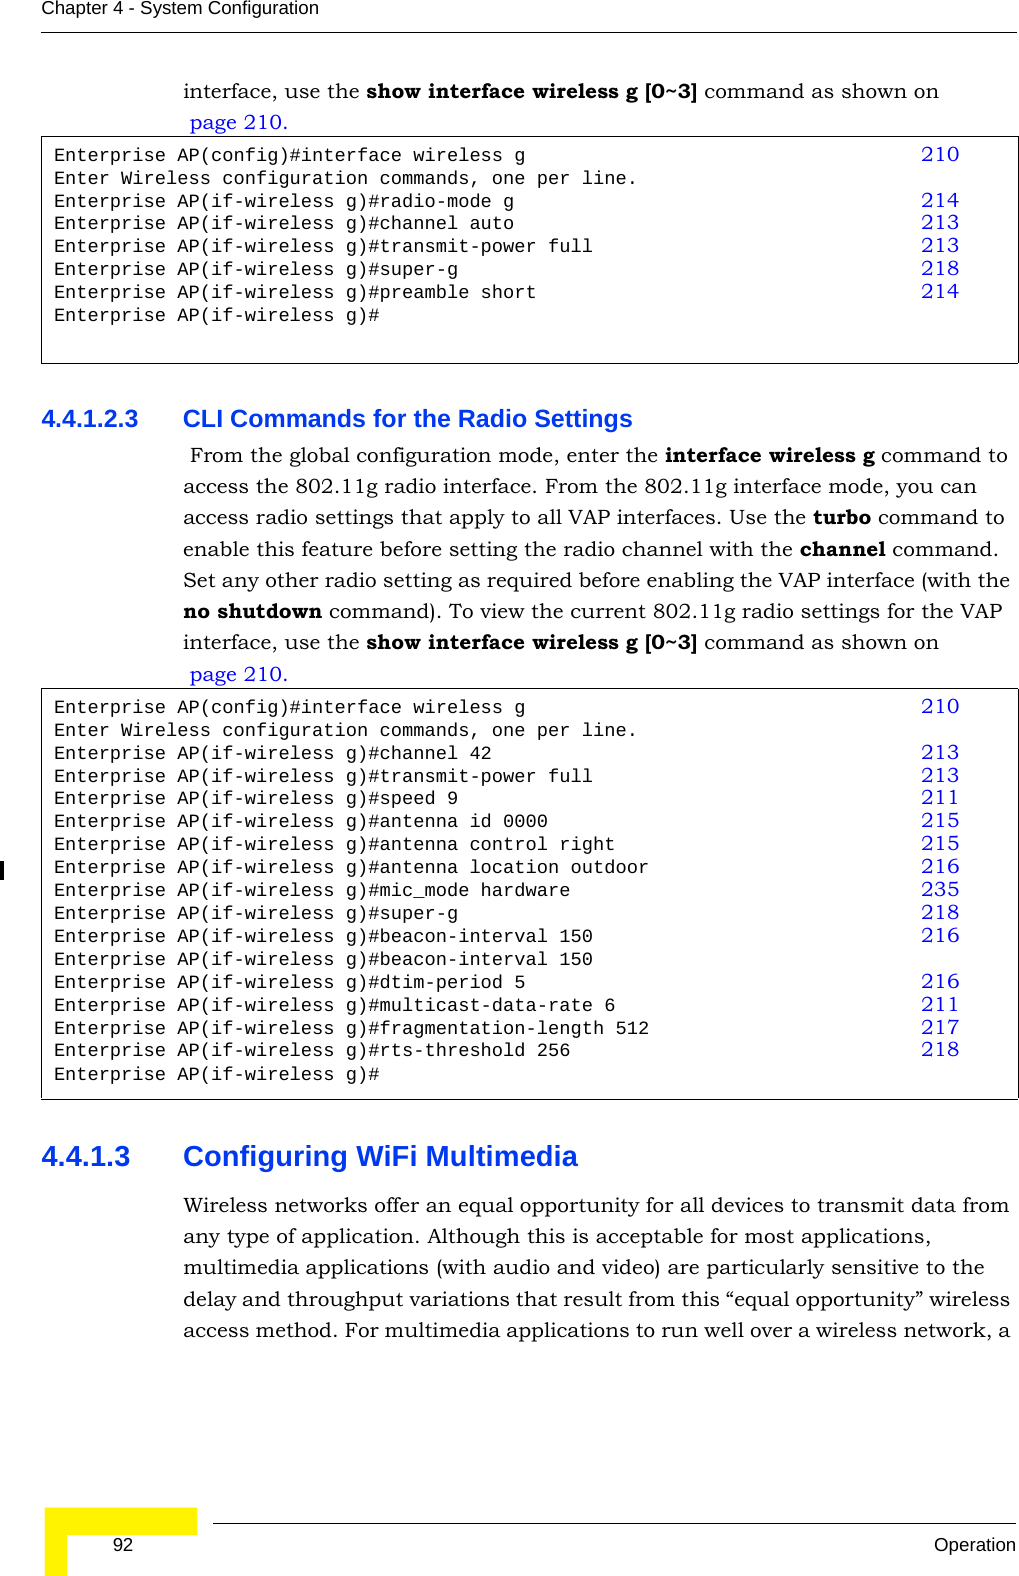  92 OperationChapter 4 - System Configurationinterface, use the show interface wireless g [0~3] command as shown on page 210.4.4.1.2.3 CLI Commands for the Radio Settings From the global configuration mode, enter the interface wireless g command to access the 802.11g radio interface. From the 802.11g interface mode, you can access radio settings that apply to all VAP interfaces. Use the turbo command to enable this feature before setting the radio channel with the channel command. Set any other radio setting as required before enabling the VAP interface (with the no shutdown command). To view the current 802.11g radio settings for the VAP interface, use the show interface wireless g [0~3] command as shown on page 210.4.4.1.3 Configuring WiFi MultimediaWireless networks offer an equal opportunity for all devices to transmit data from any type of application. Although this is acceptable for most applications, multimedia applications (with audio and video) are particularly sensitive to the delay and throughput variations that result from this “equal opportunity” wireless access method. For multimedia applications to run well over a wireless network, a Enterprise AP(config)#interface wireless g 210Enter Wireless configuration commands, one per line.Enterprise AP(if-wireless g)#radio-mode g 214Enterprise AP(if-wireless g)#channel auto 213Enterprise AP(if-wireless g)#transmit-power full 213Enterprise AP(if-wireless g)#super-g 218Enterprise AP(if-wireless g)#preamble short 214Enterprise AP(if-wireless g)#Enterprise AP(config)#interface wireless g 210Enter Wireless configuration commands, one per line.Enterprise AP(if-wireless g)#channel 42 213Enterprise AP(if-wireless g)#transmit-power full 213Enterprise AP(if-wireless g)#speed 9 211Enterprise AP(if-wireless g)#antenna id 0000 215Enterprise AP(if-wireless g)#antenna control right 215Enterprise AP(if-wireless g)#antenna location outdoor 216Enterprise AP(if-wireless g)#mic_mode hardware 235Enterprise AP(if-wireless g)#super-g 218Enterprise AP(if-wireless g)#beacon-interval 150 216Enterprise AP(if-wireless g)#beacon-interval 150Enterprise AP(if-wireless g)#dtim-period 5 216Enterprise AP(if-wireless g)#multicast-data-rate 6 211Enterprise AP(if-wireless g)#fragmentation-length 512 217Enterprise AP(if-wireless g)#rts-threshold 256 218Enterprise AP(if-wireless g)#